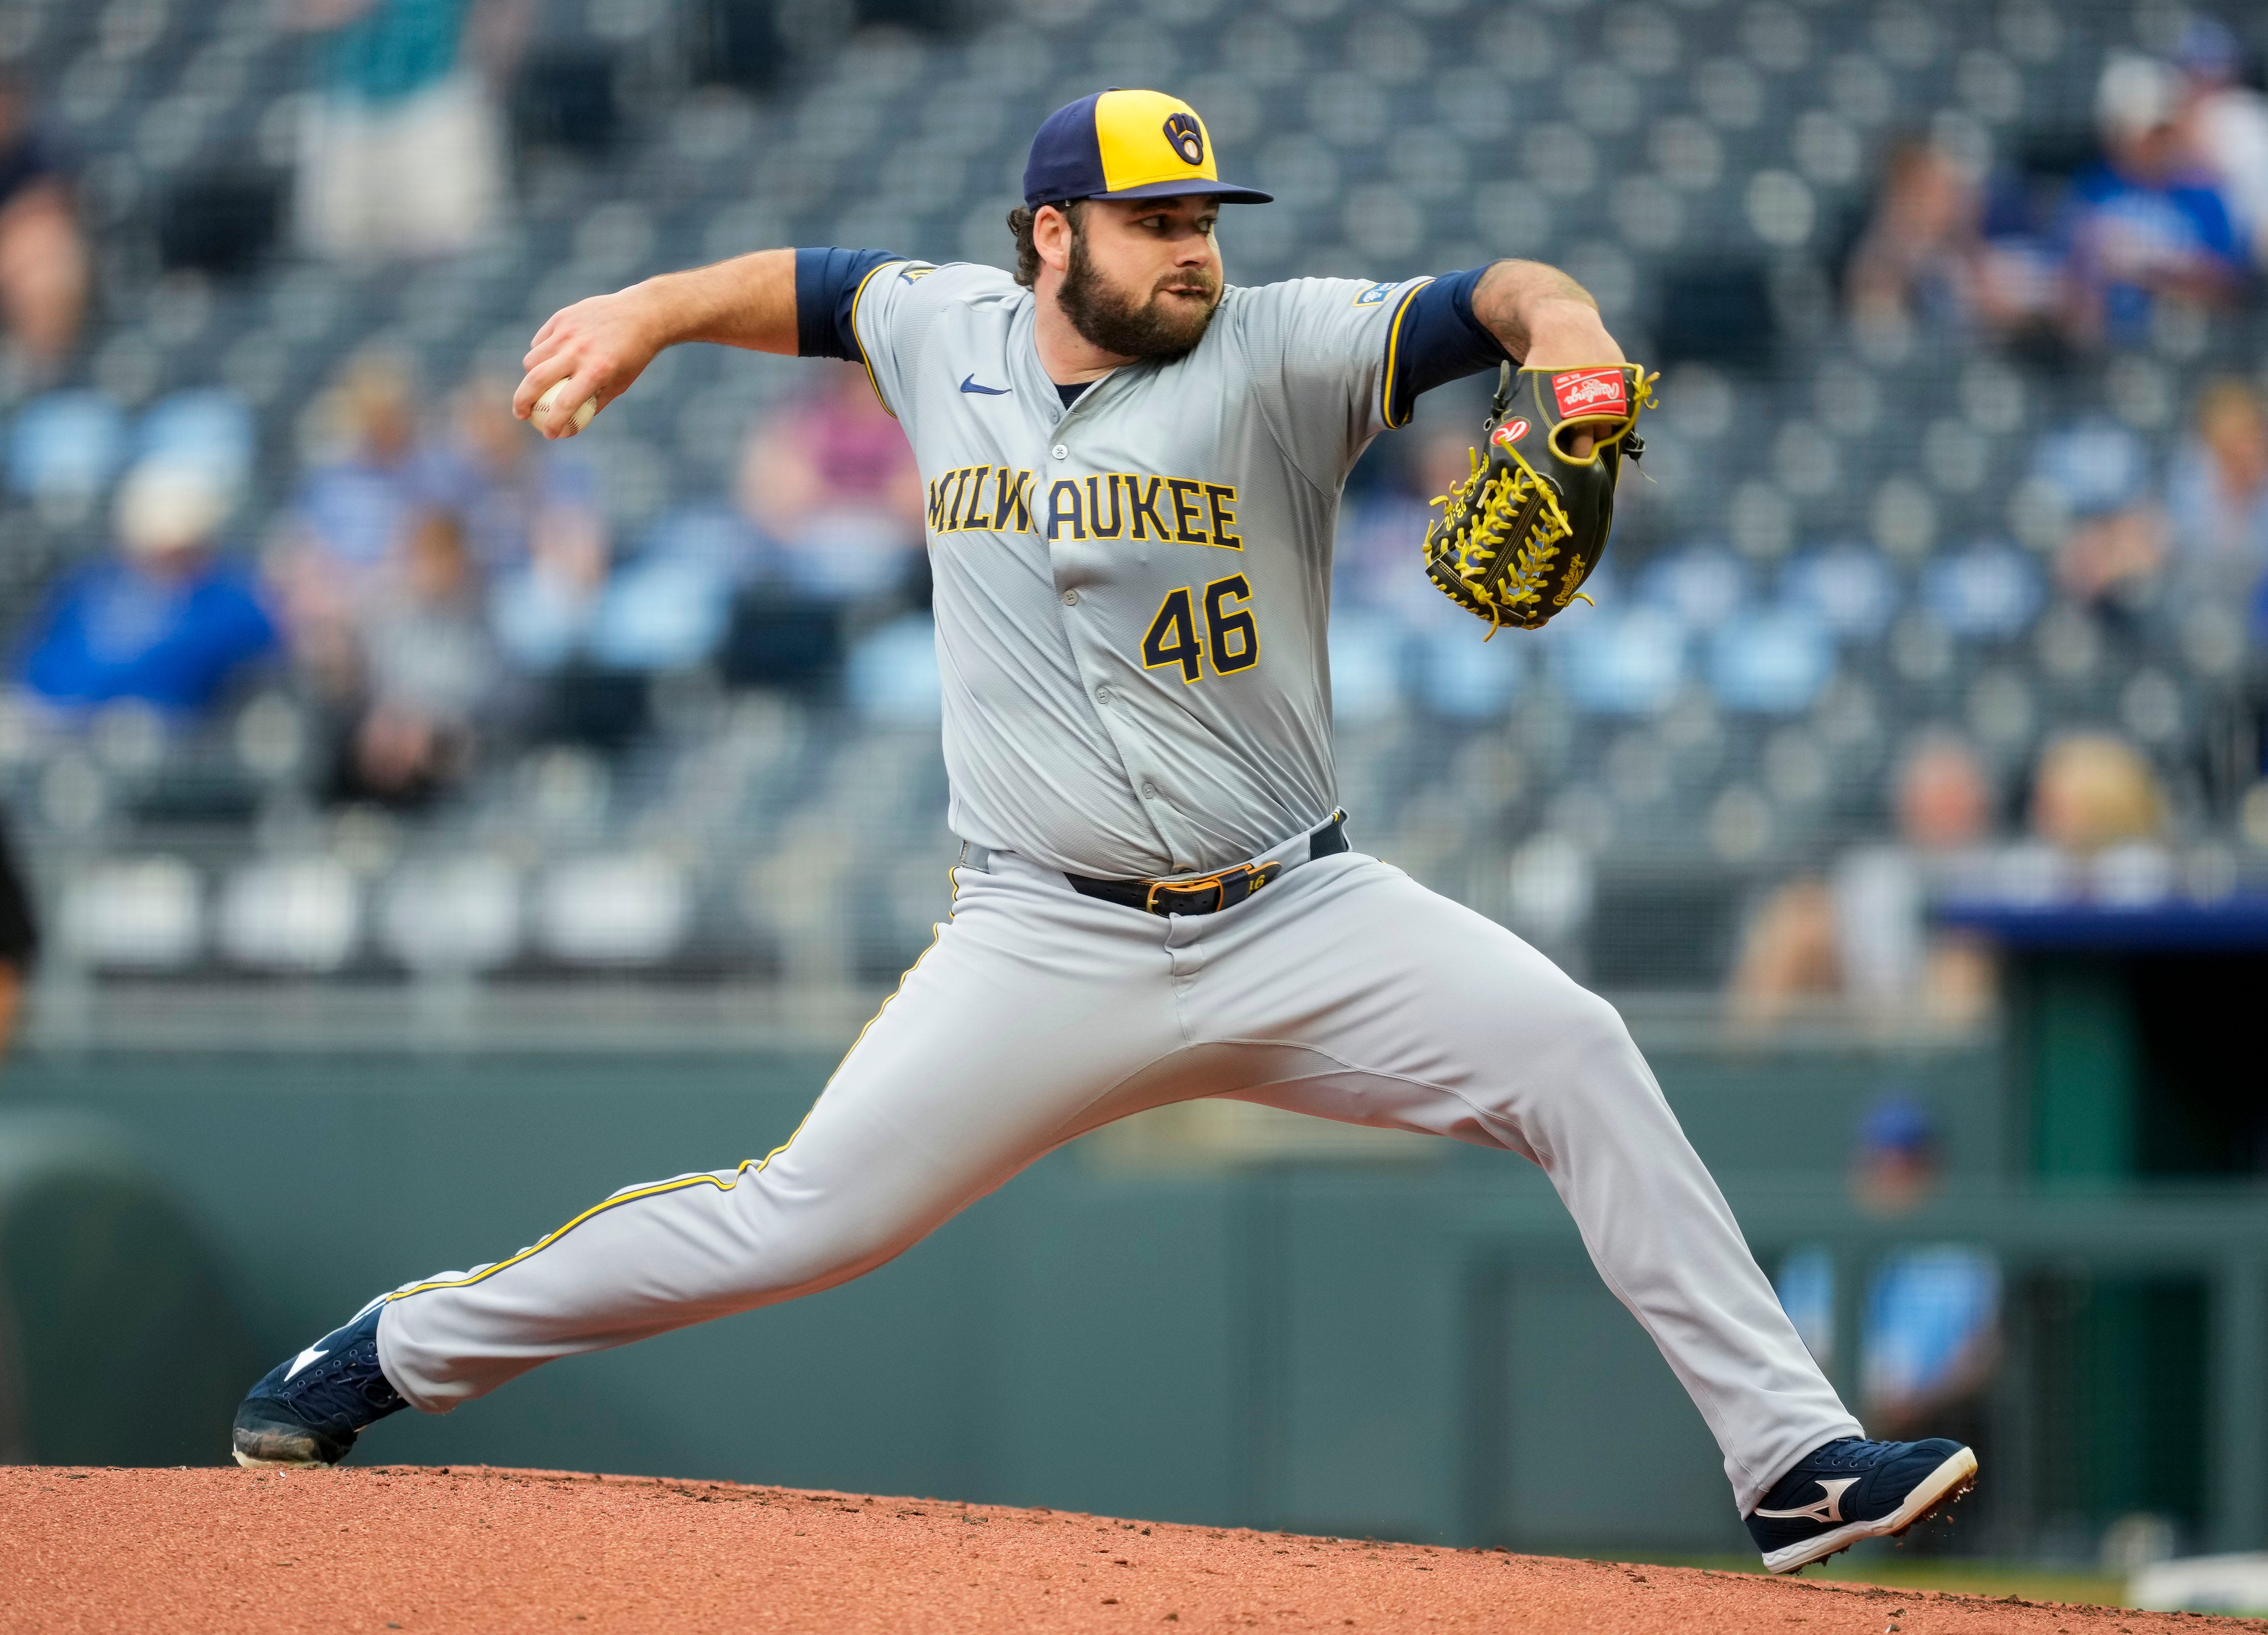 Bryse Wilson was a bright spot on a night when not much else went right for the Brewers